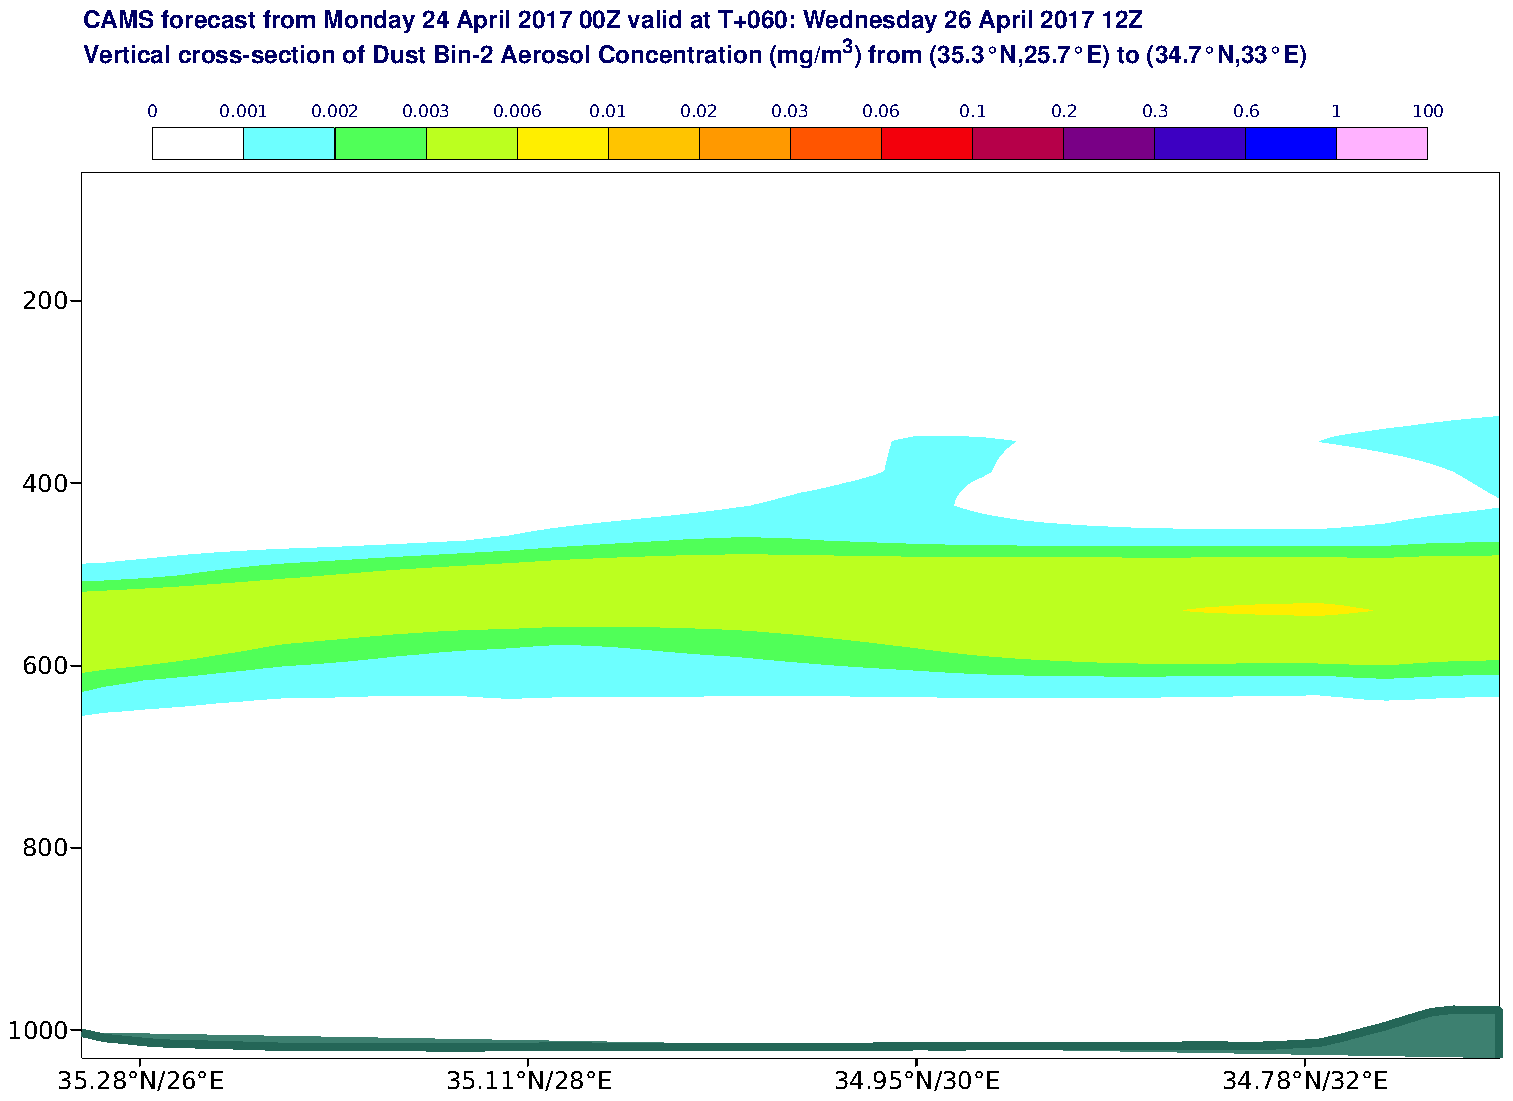 Vertical cross-section of Dust Bin-2 Aerosol Concentration (mg/m3) valid at T60 - 2017-04-26 12:00